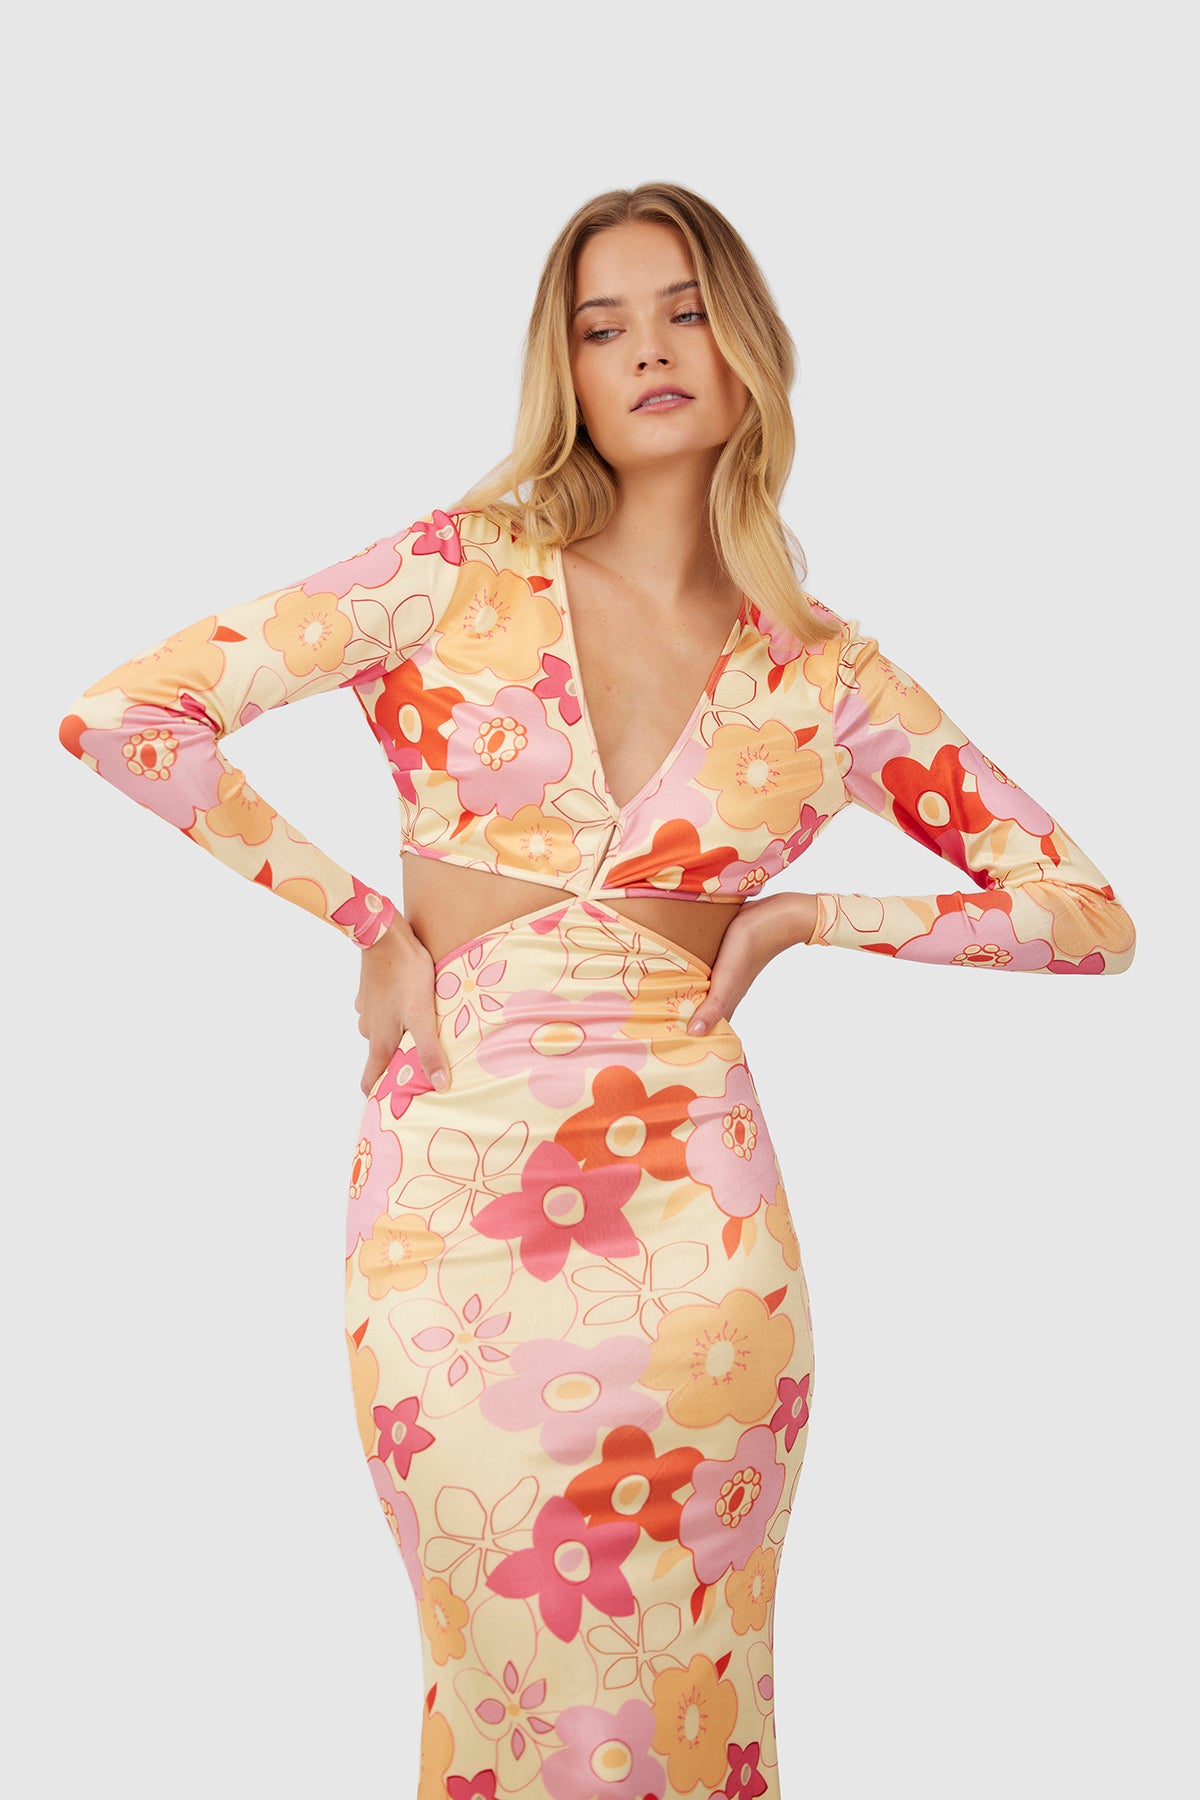 Finders - Goldie Midi Dress - Yellow Retro Floral